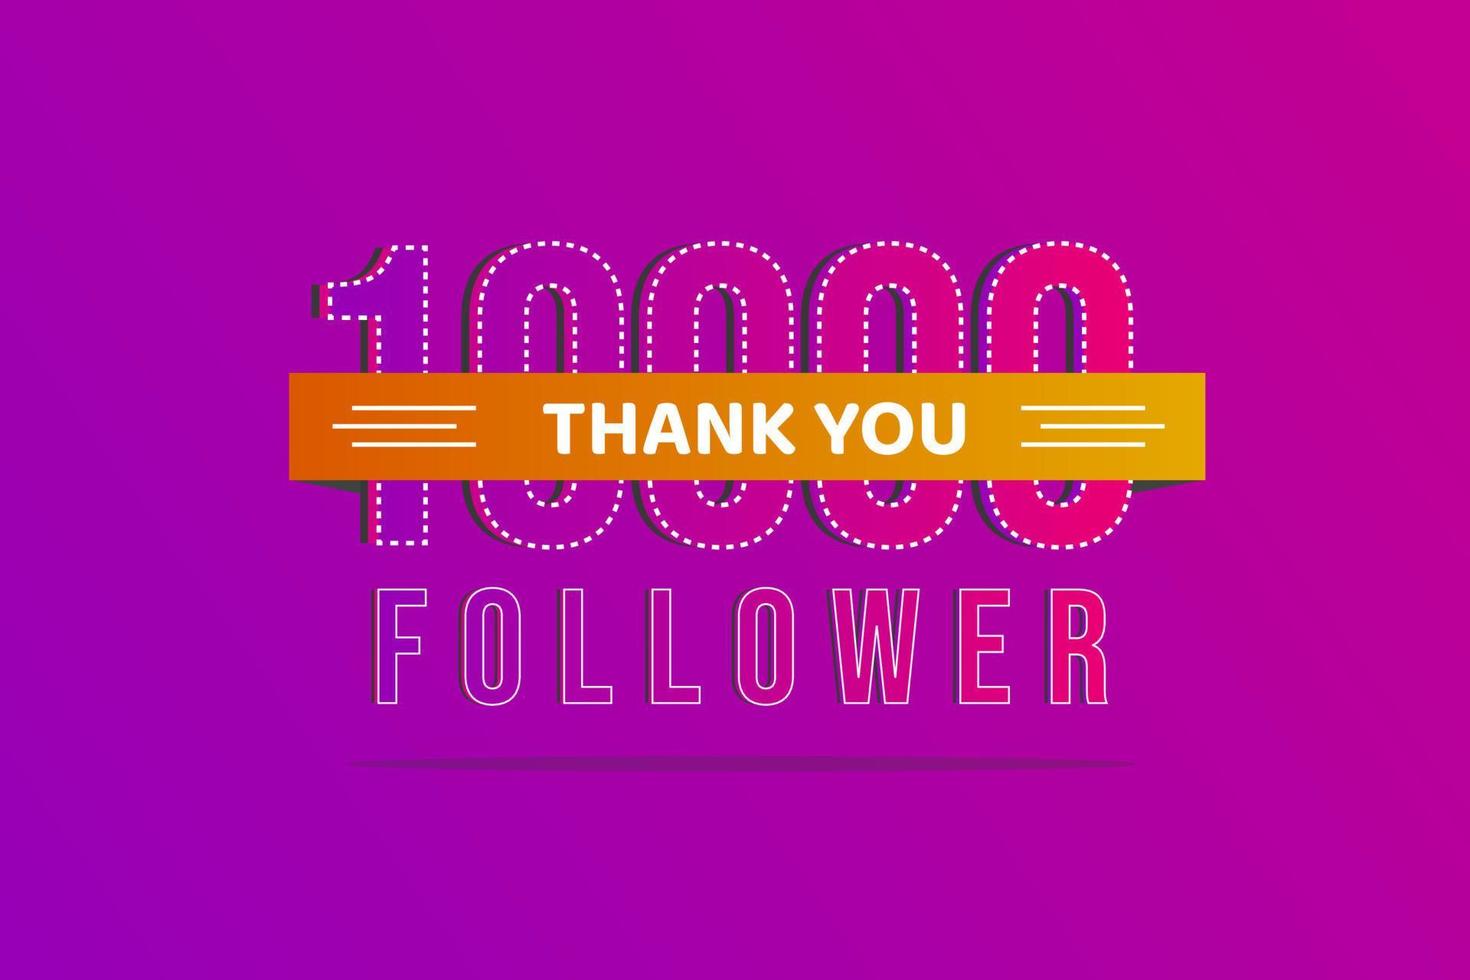 Thank you 10000 followers thank you banner.First 10K followers congratulation card with numbers vector